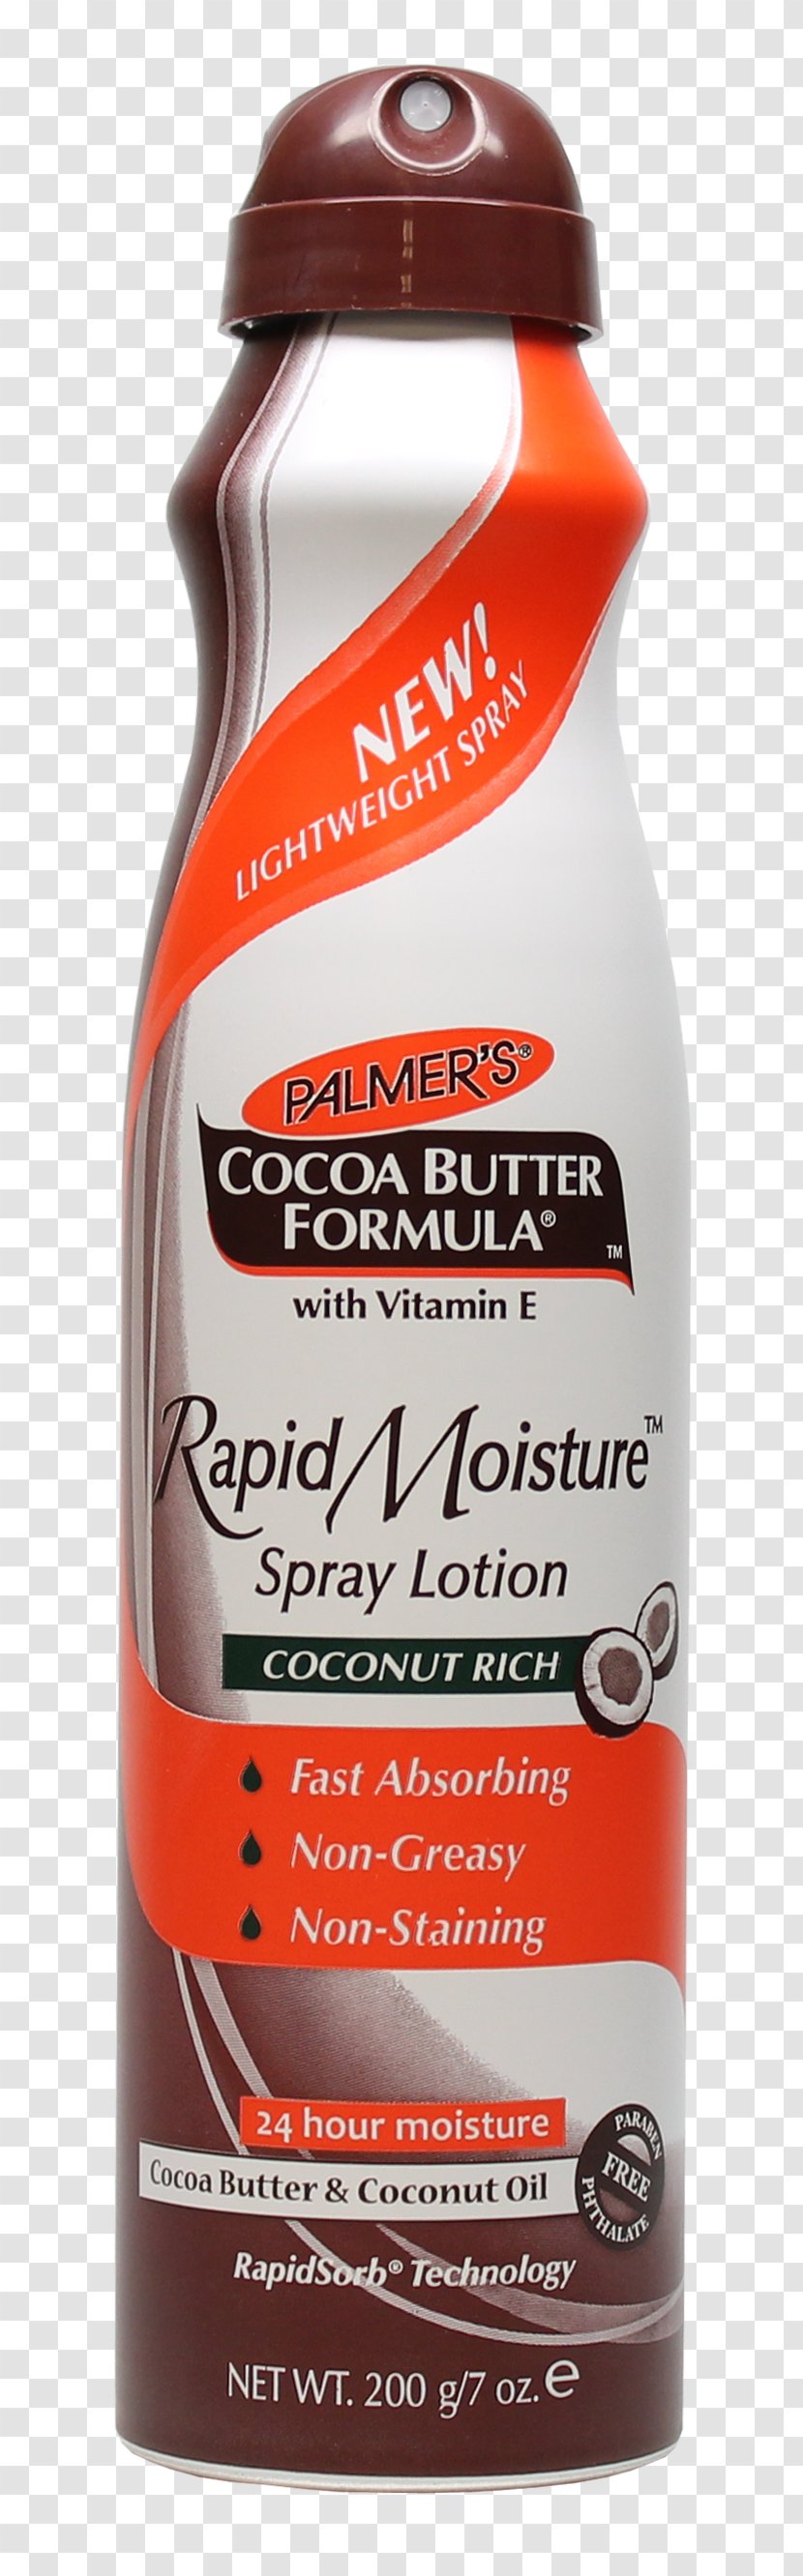 Palmer's Cocoa Butter Formula Cream Soap Product Cacao Tree - Peixe Igual Transparent PNG